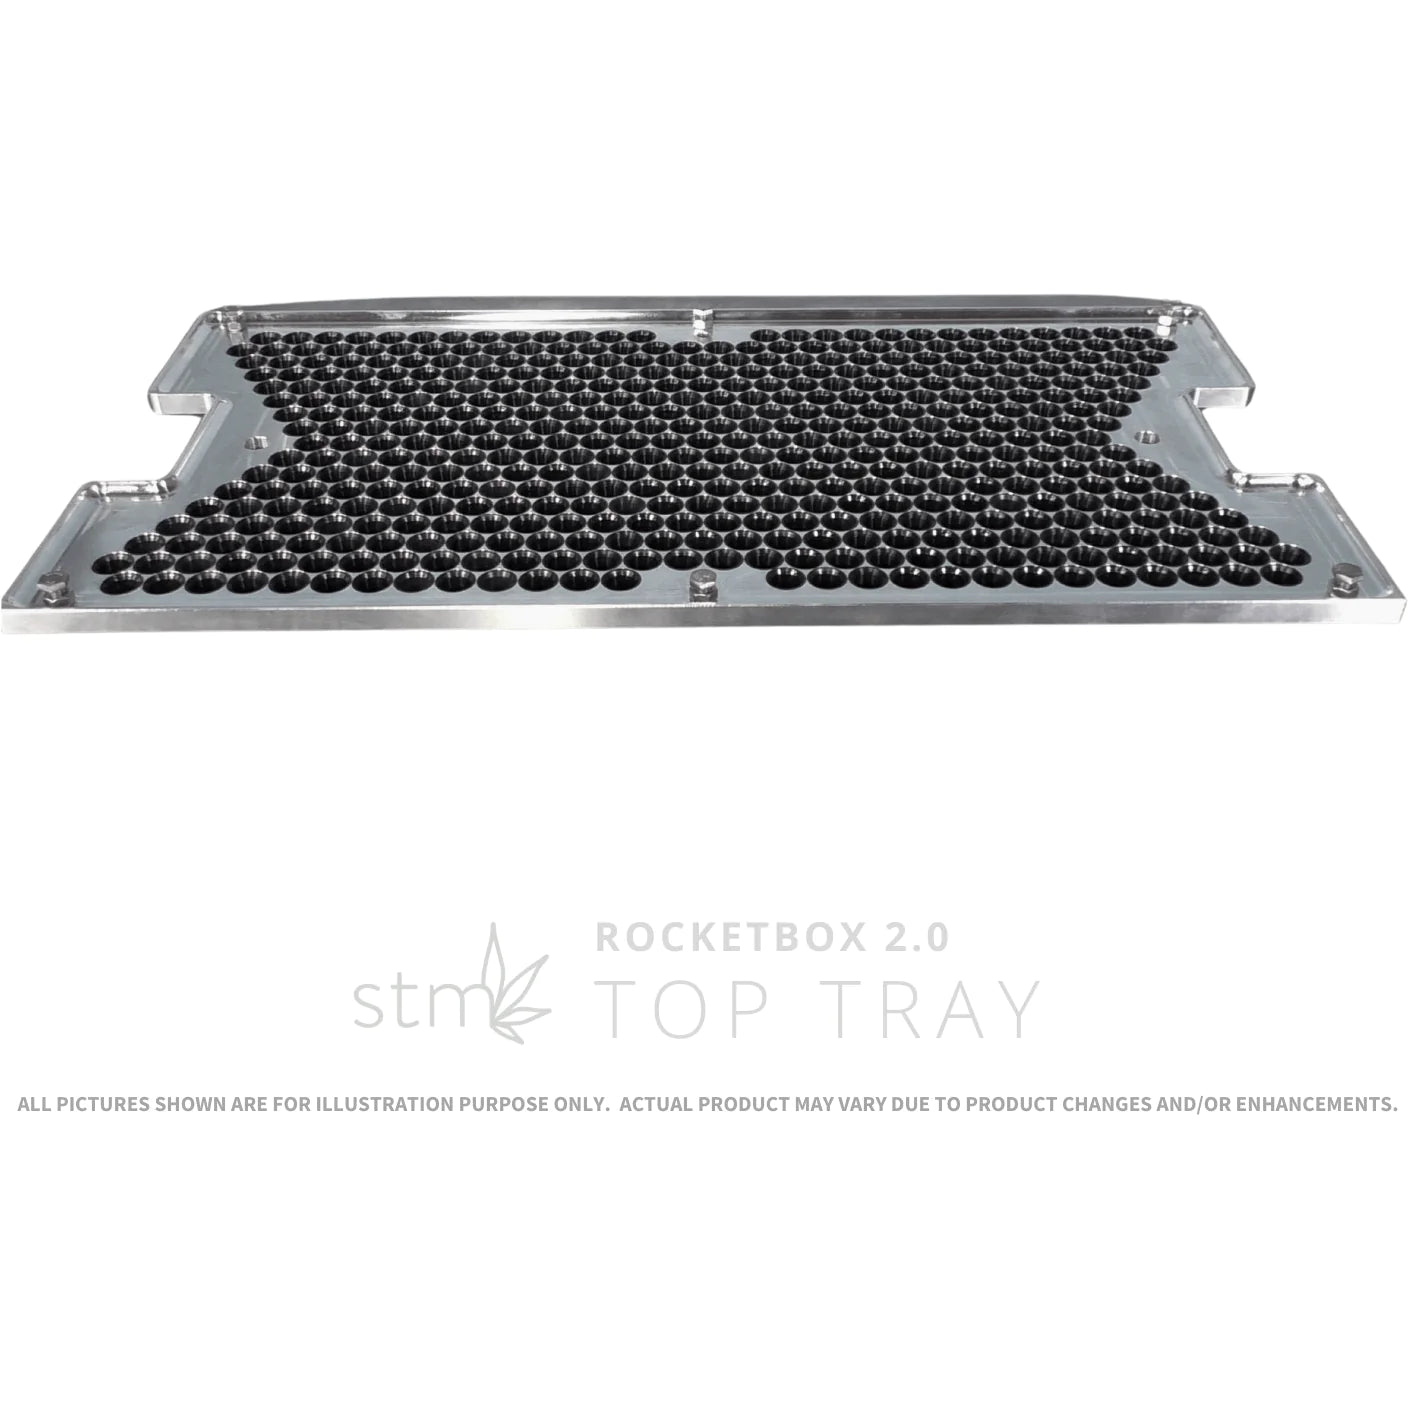 Product Secondary Image:STM RocketBox 2.0 Pre-Roll Machine (84mm) / 453 Tray Configuration